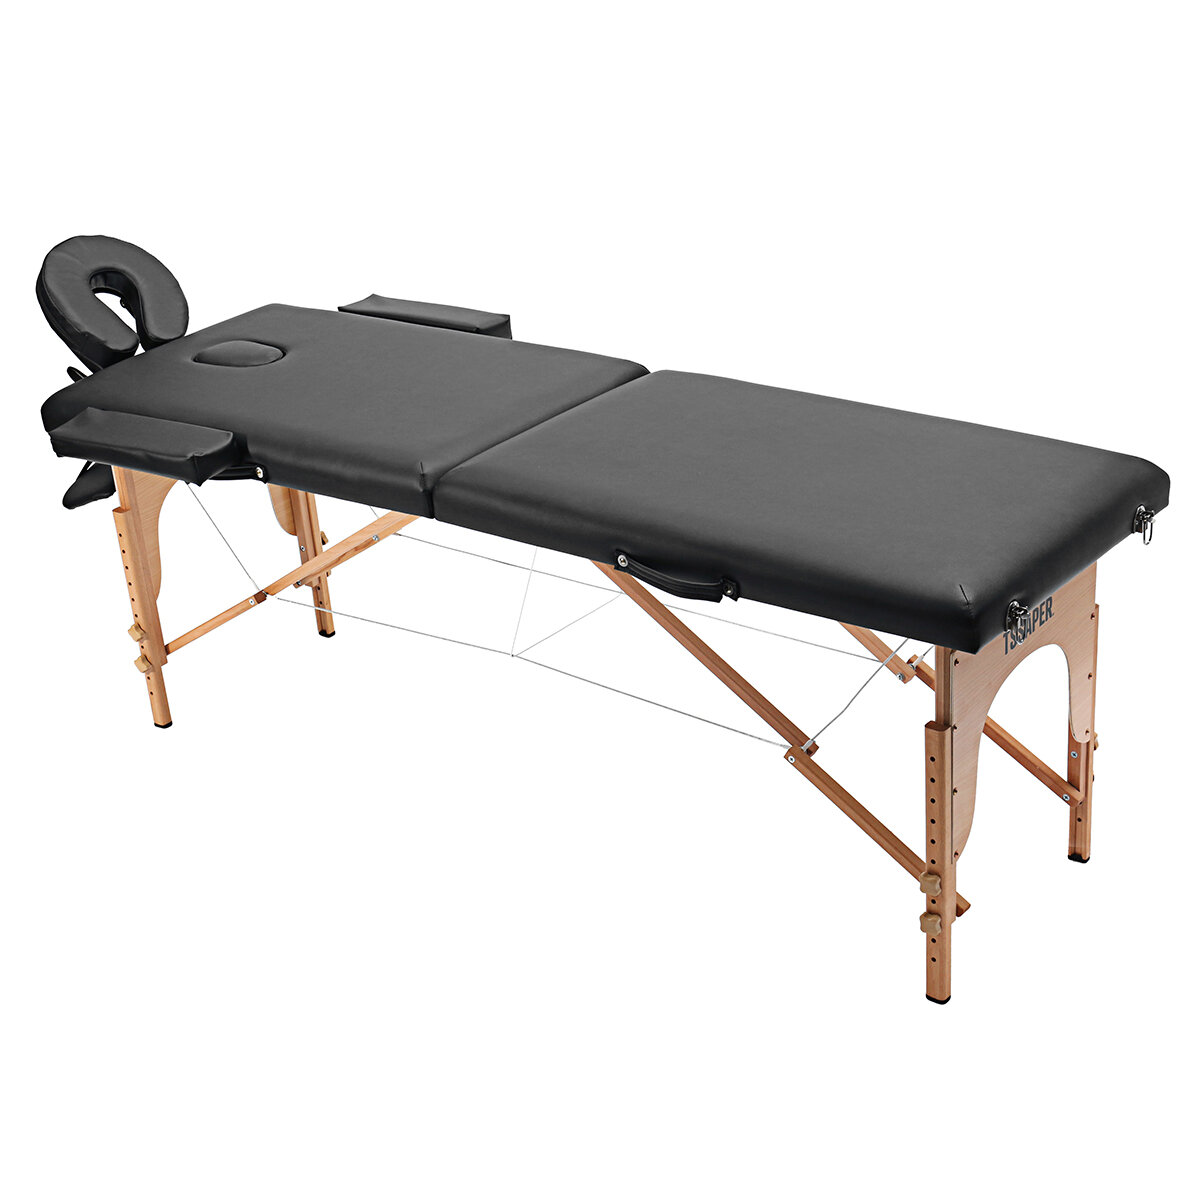 Massage Table Spa Bed Portable Adjustable Folding Beauty Salon Therapy Couch